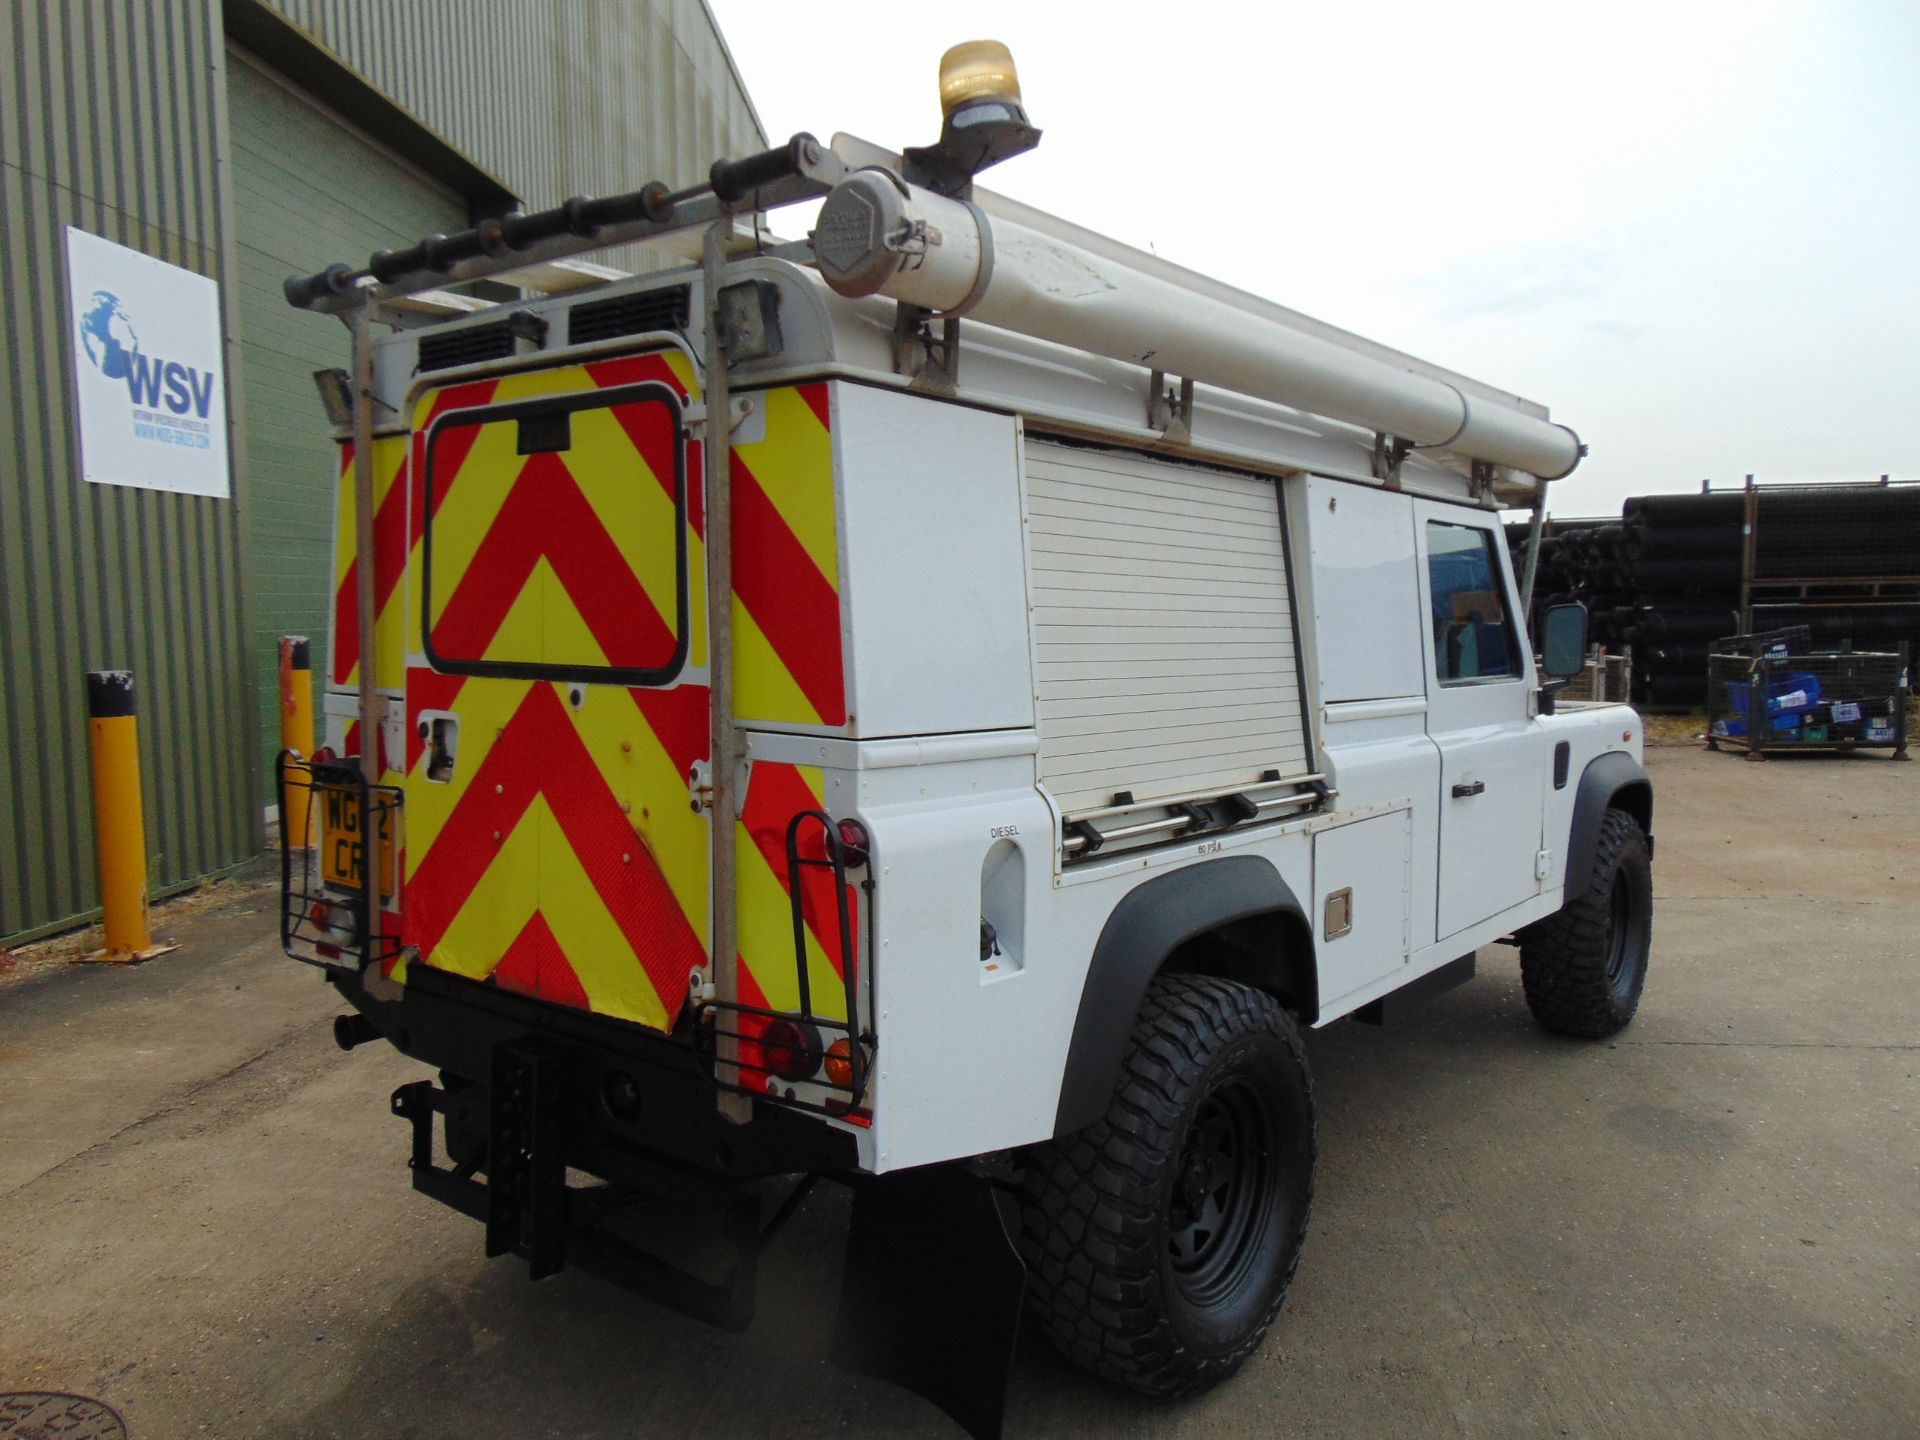 2013 Land Rover Defender 110 Puma hardtop 4x4 Utility vehicle (mobile workshop) with hydraulic winch - Image 8 of 44